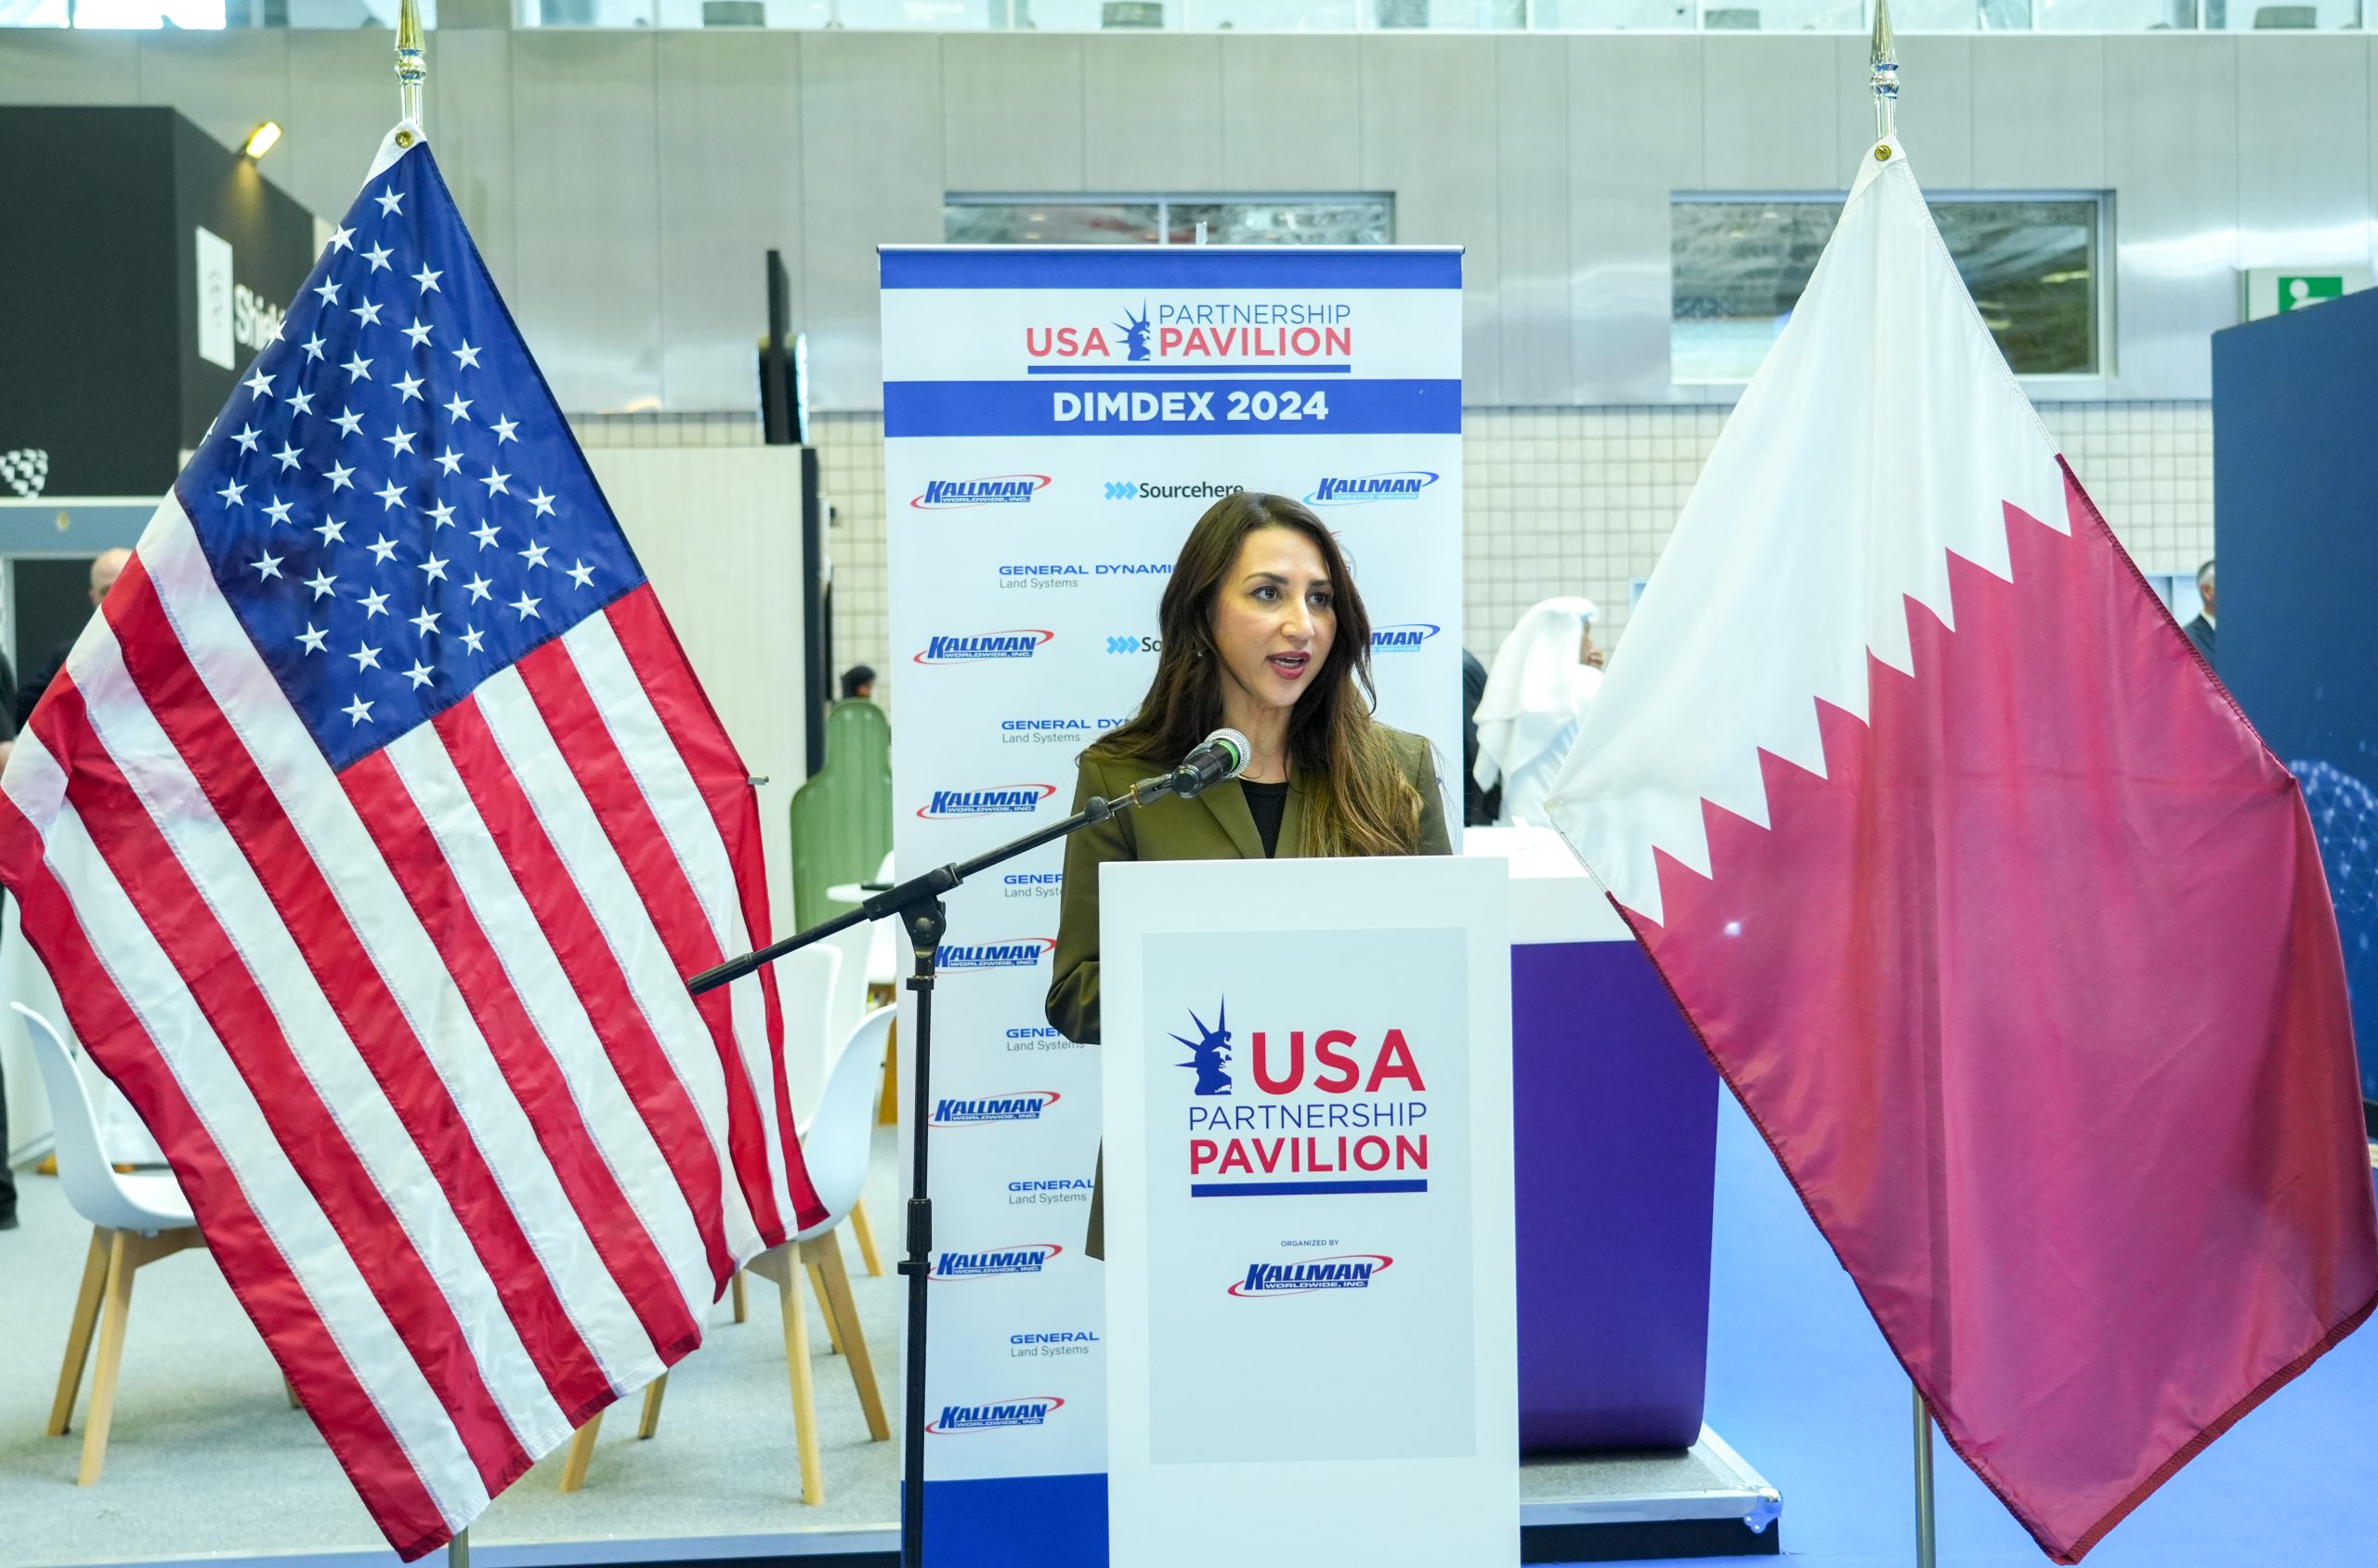 The USA Partnership Pavilion was officially opened for business in Doha by Charge d’Affaires Natalie A. Baker, U.S. Embassy Doha, Qatar.